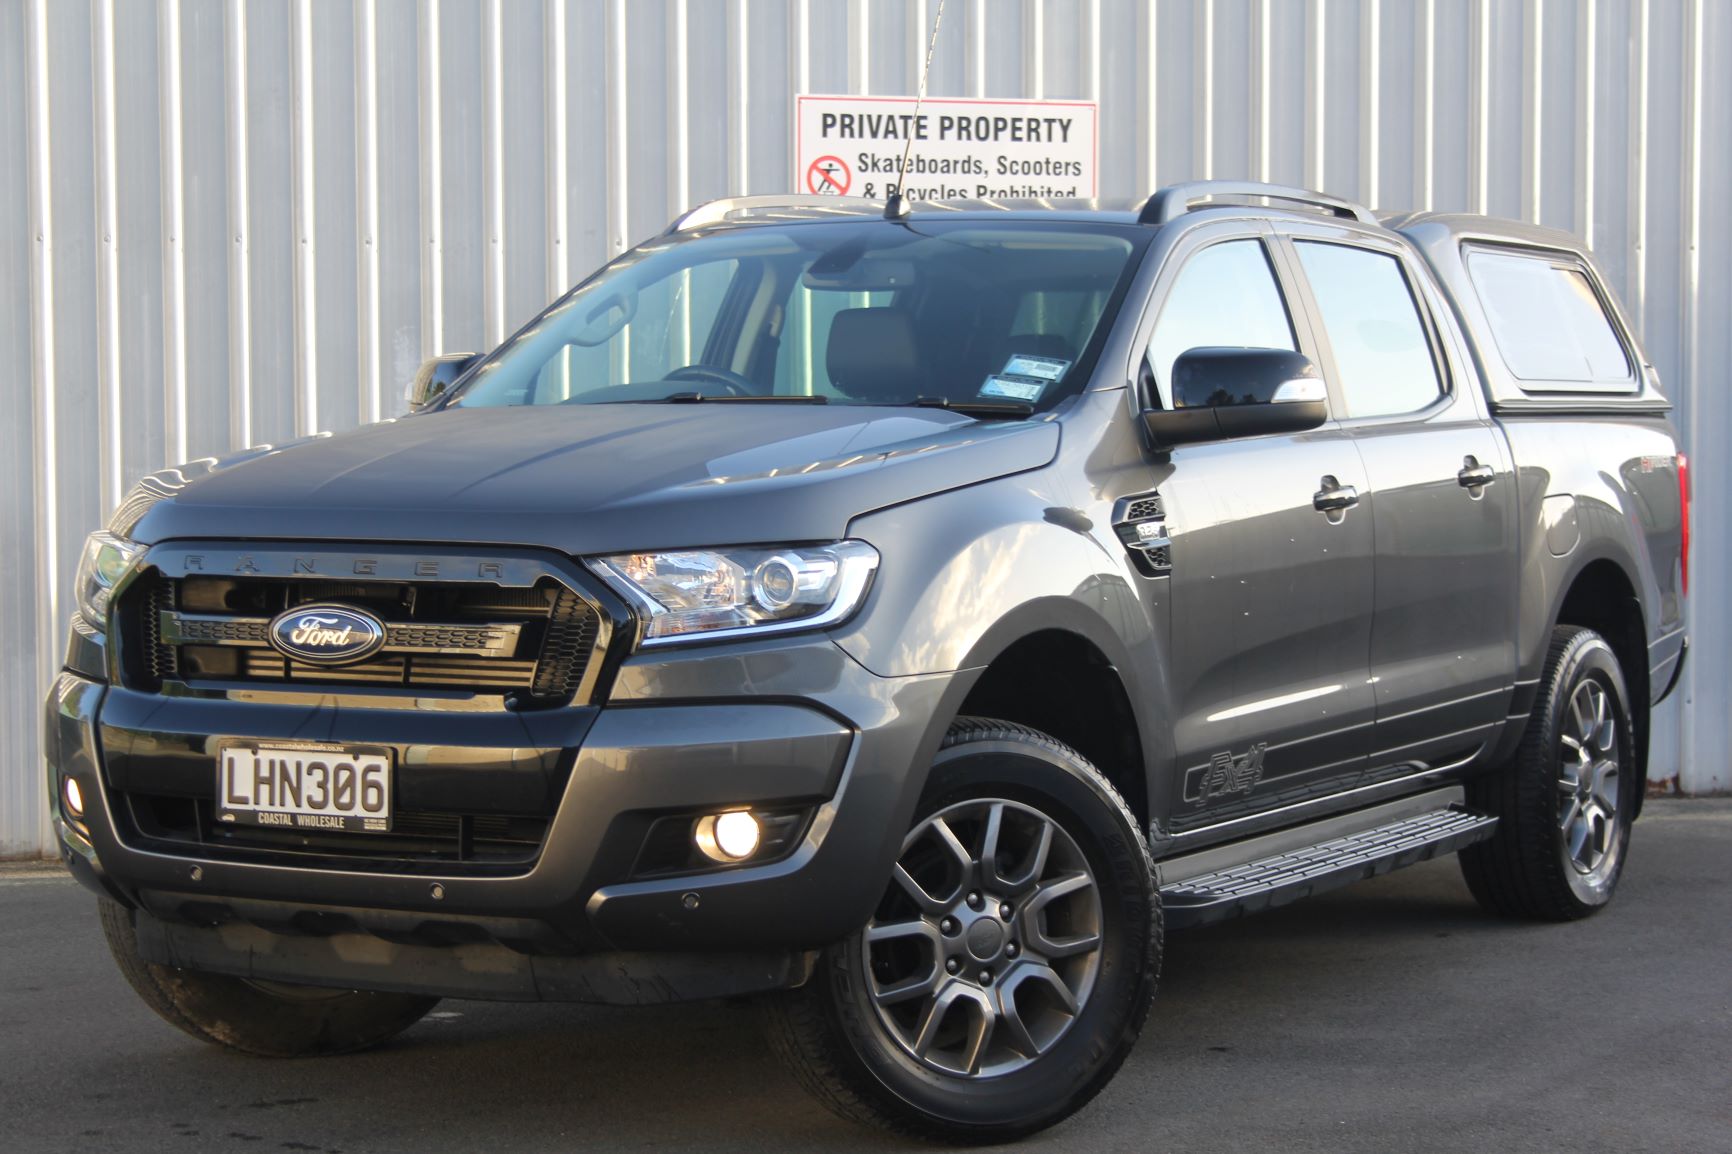 Ford Ranger FX4 2018 for sale in Auckland